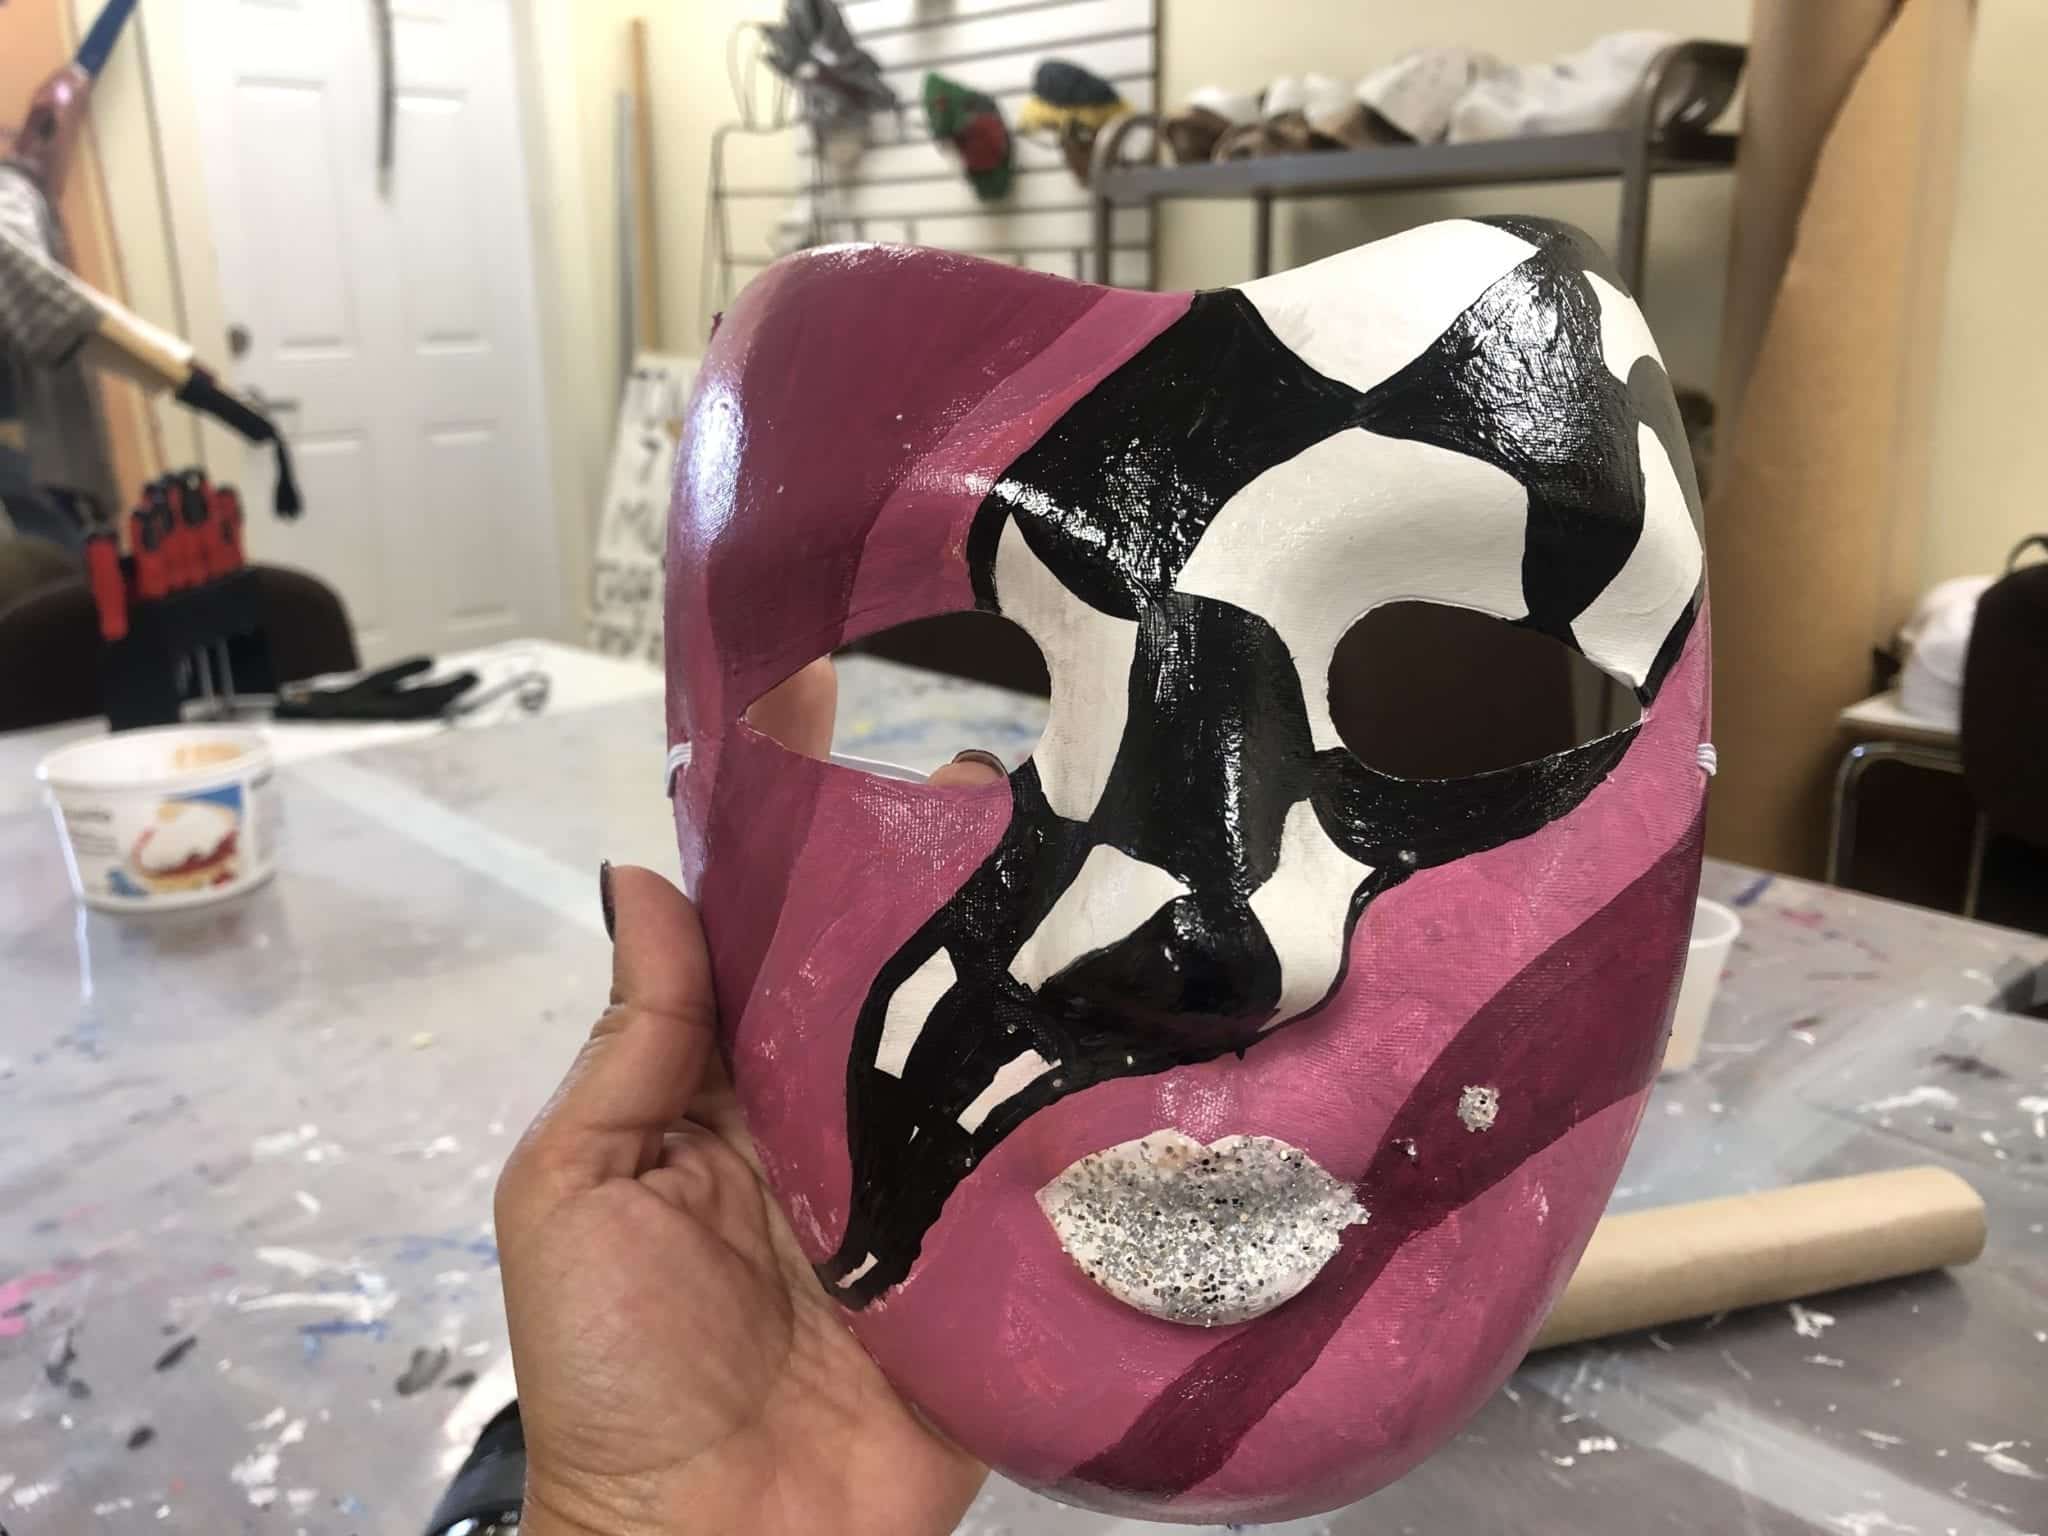 Kate holds her painted Mi-Careme mask -- pink and purple stripes with a black and white checked design running diagonally across the side, with silvery glitter lips.